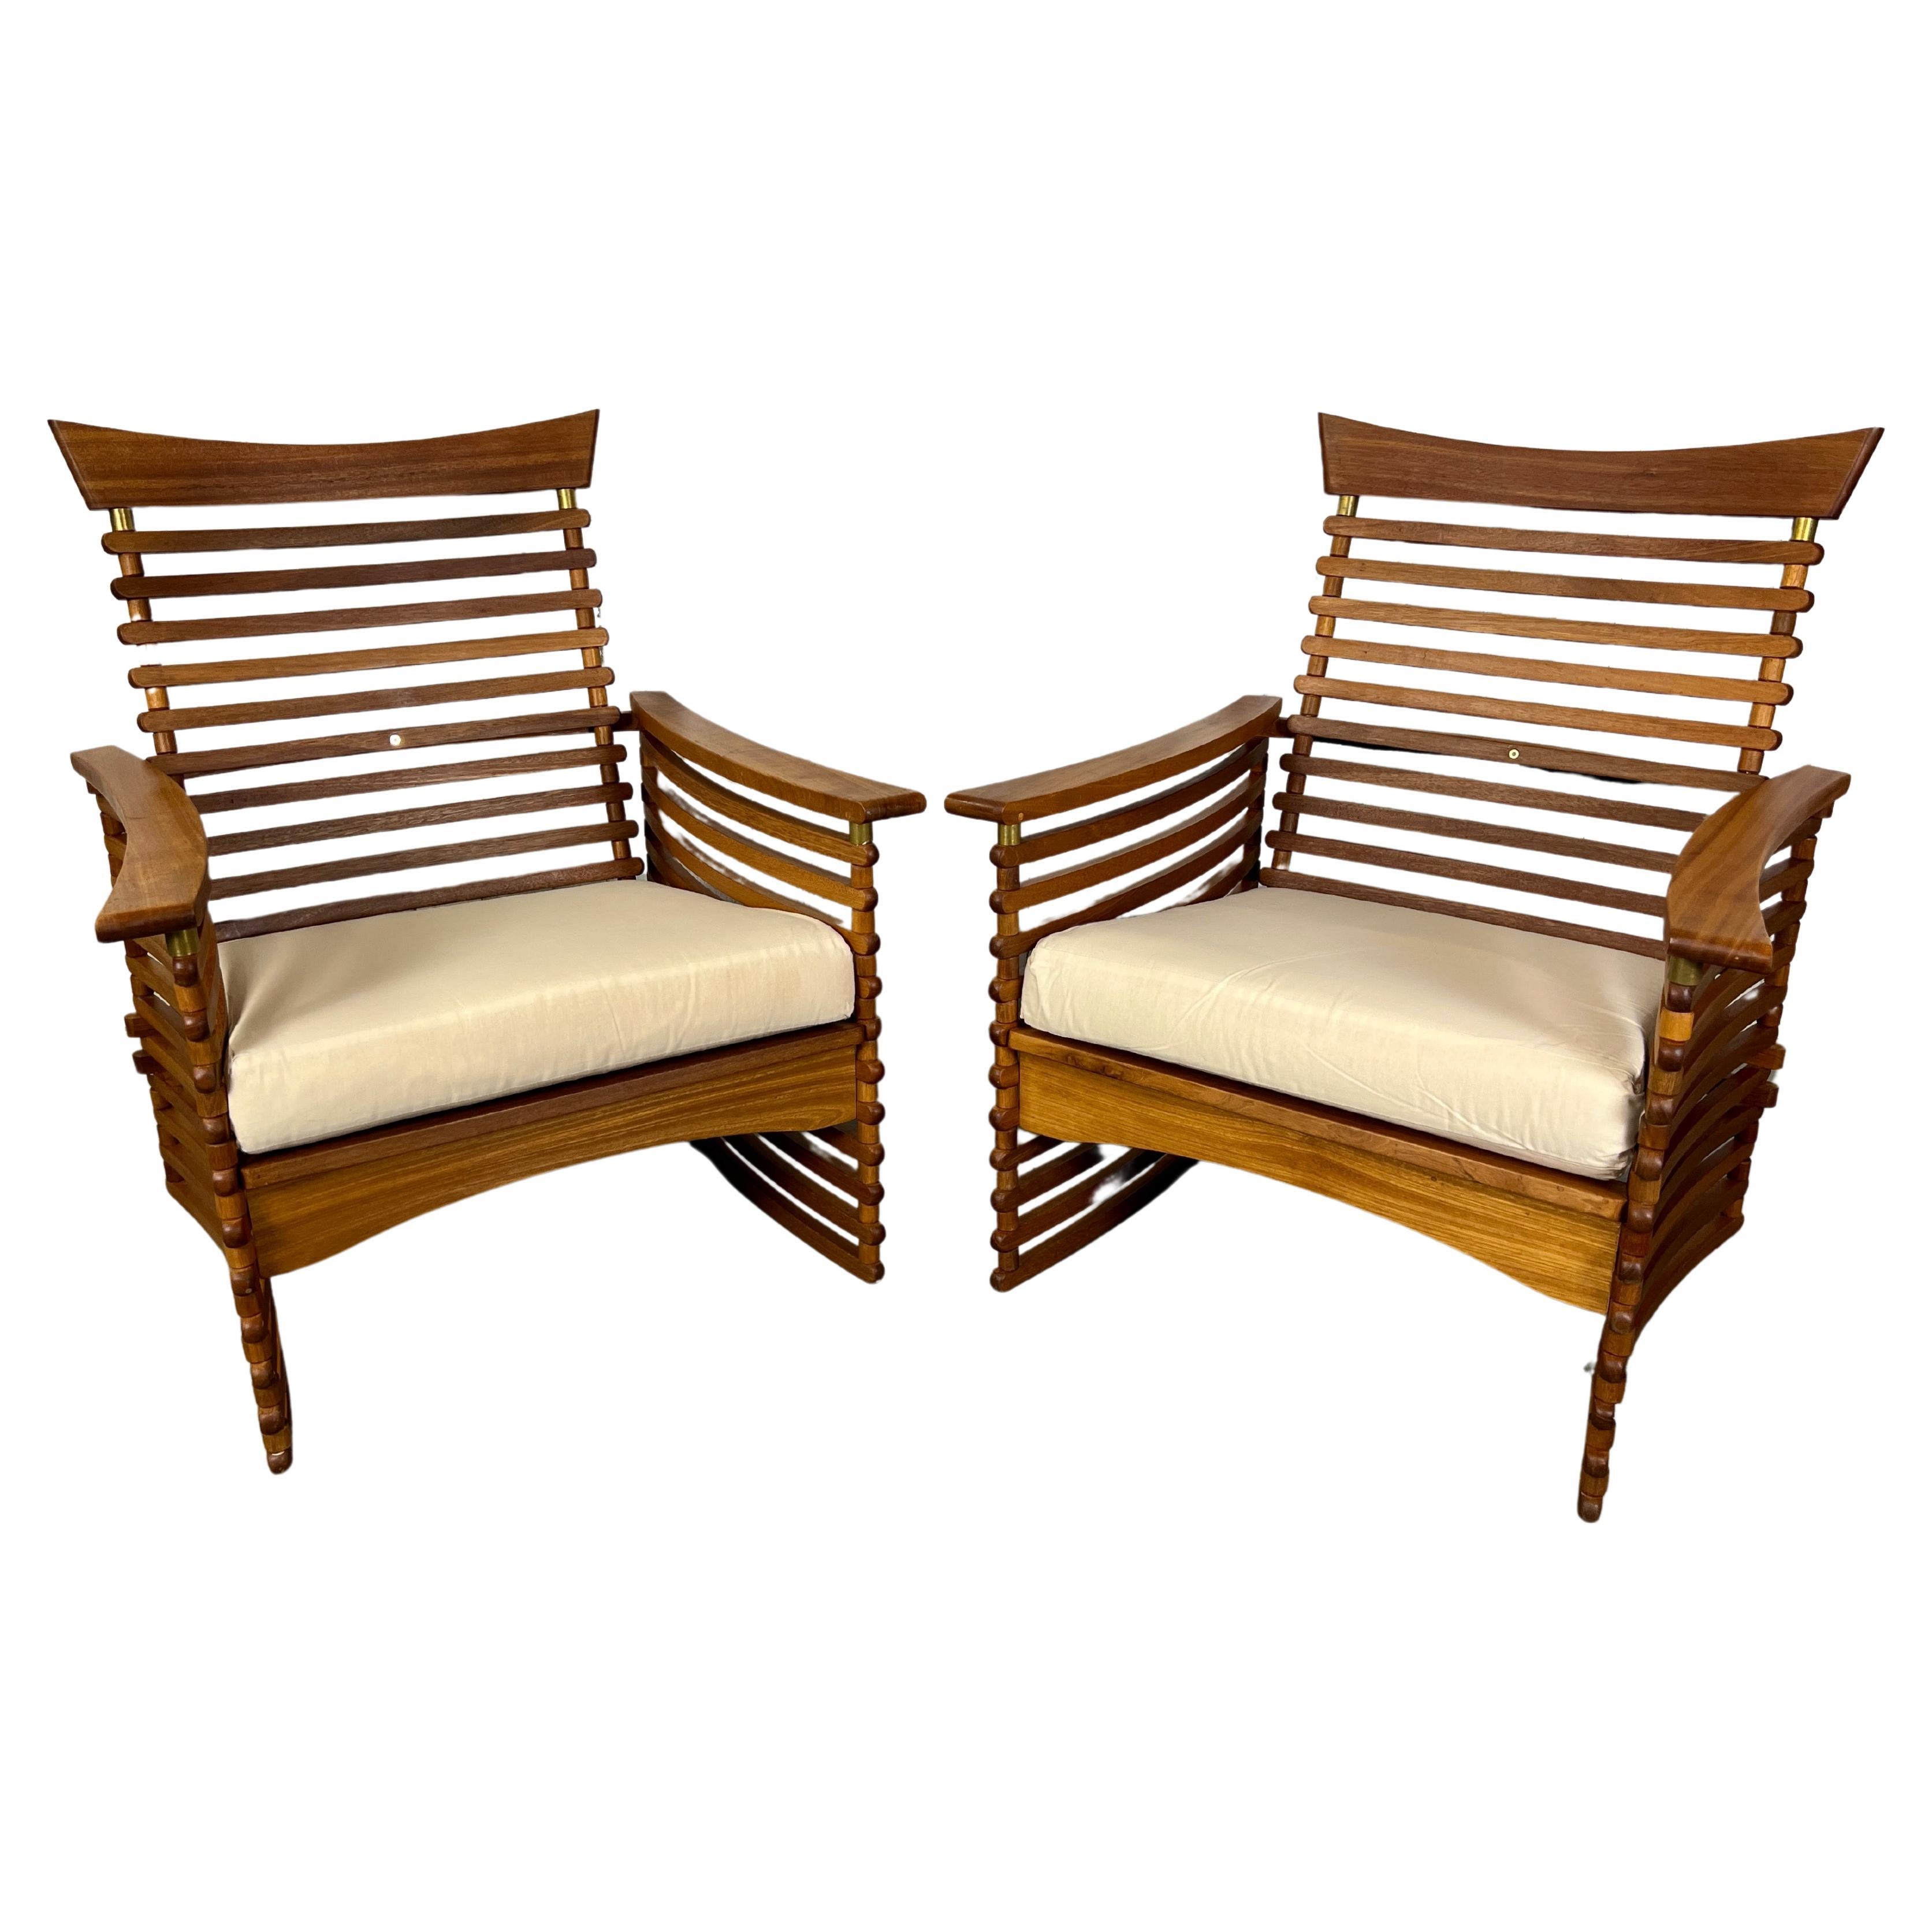 Solid teak slat lounge chairs with brass accents. The sides are curved with a nice angle on the back. These are very sturdy and very comfortable for long term sitting. 
New upholstery is required.